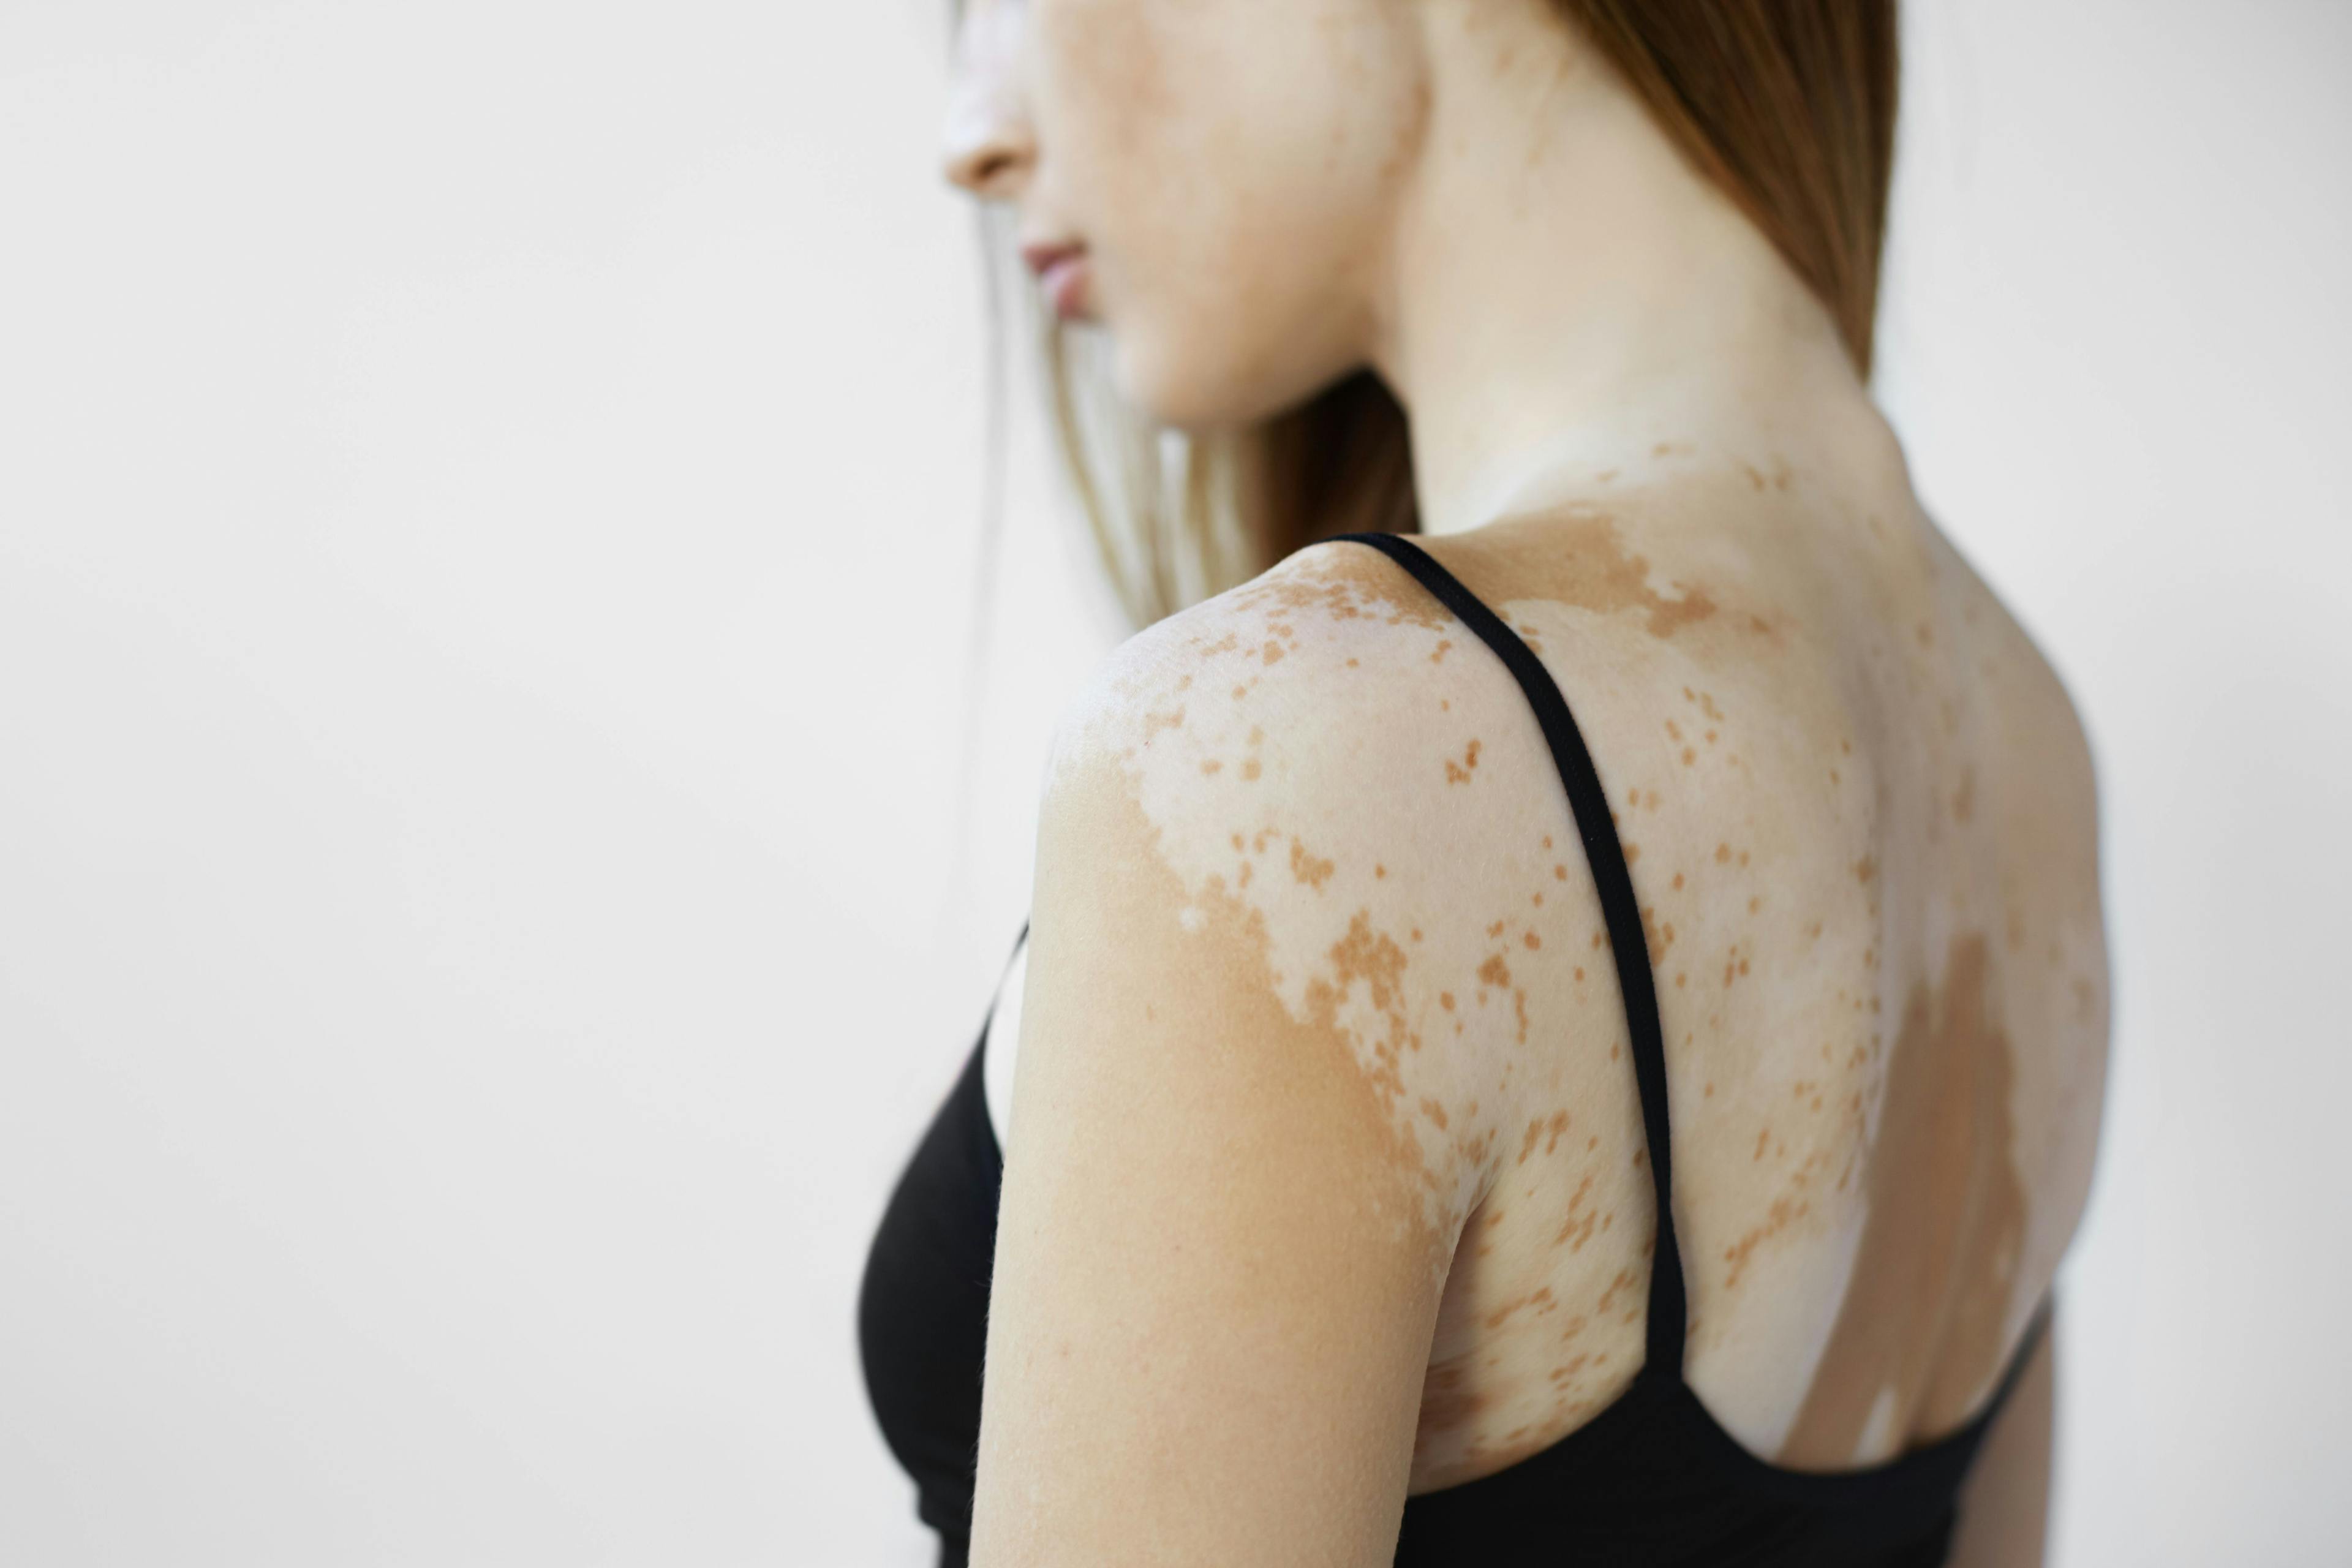 Studies Find High Prevalence of Suicidal Ideation in Patients with Vitiligo